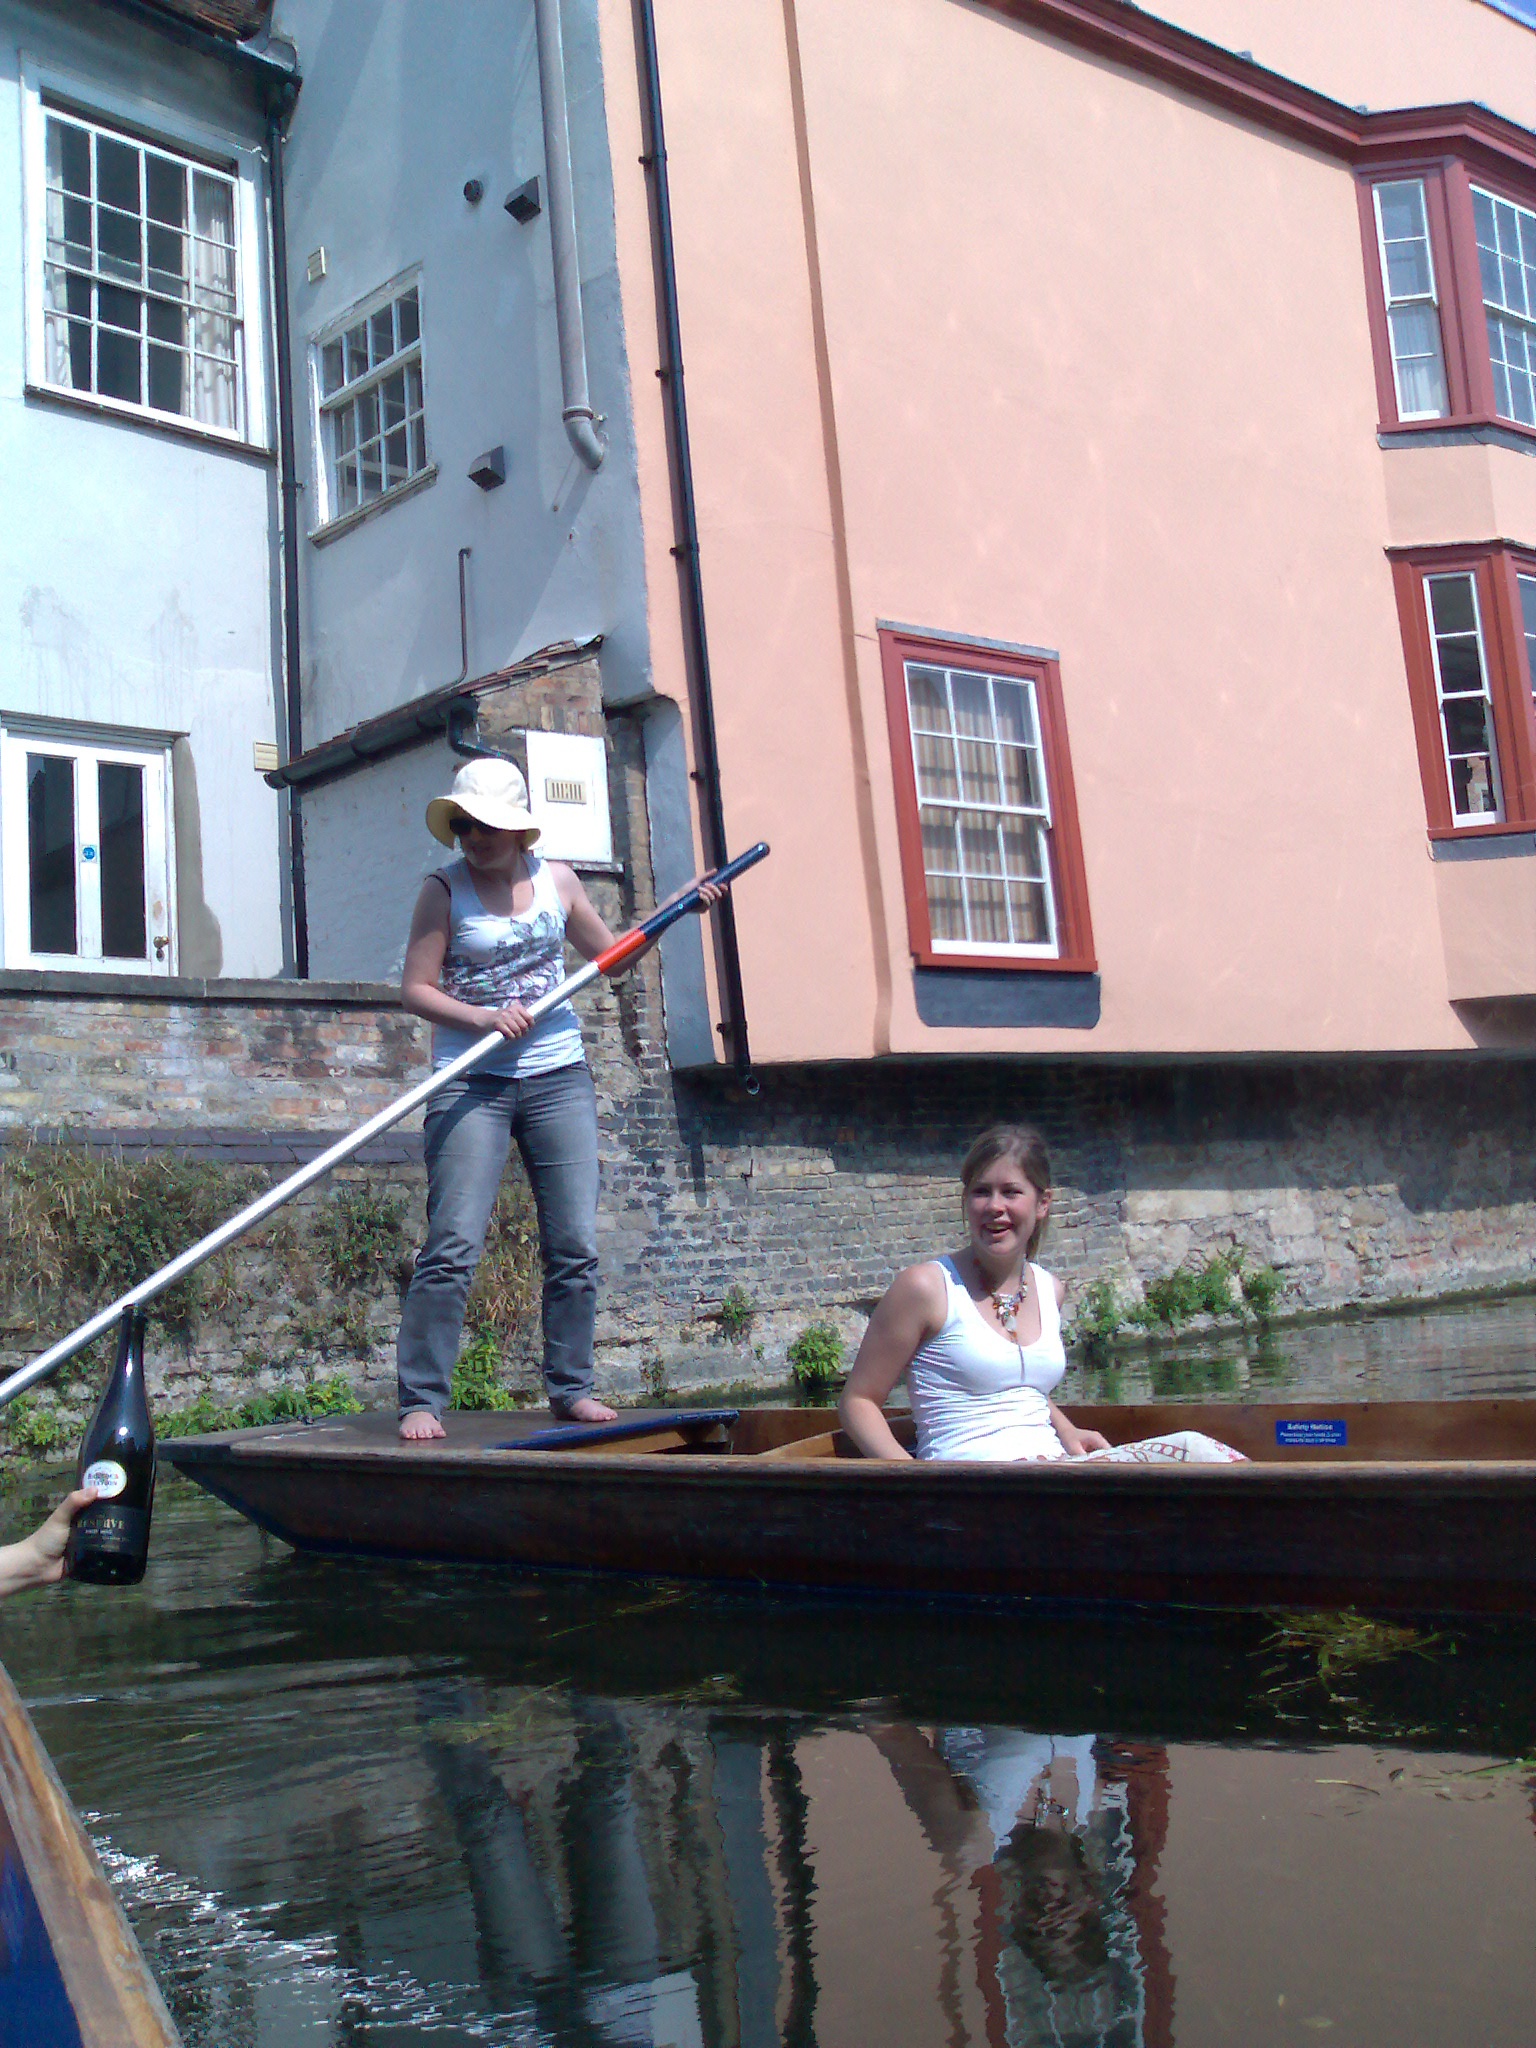 Jude punting in the deepest part of the Cam